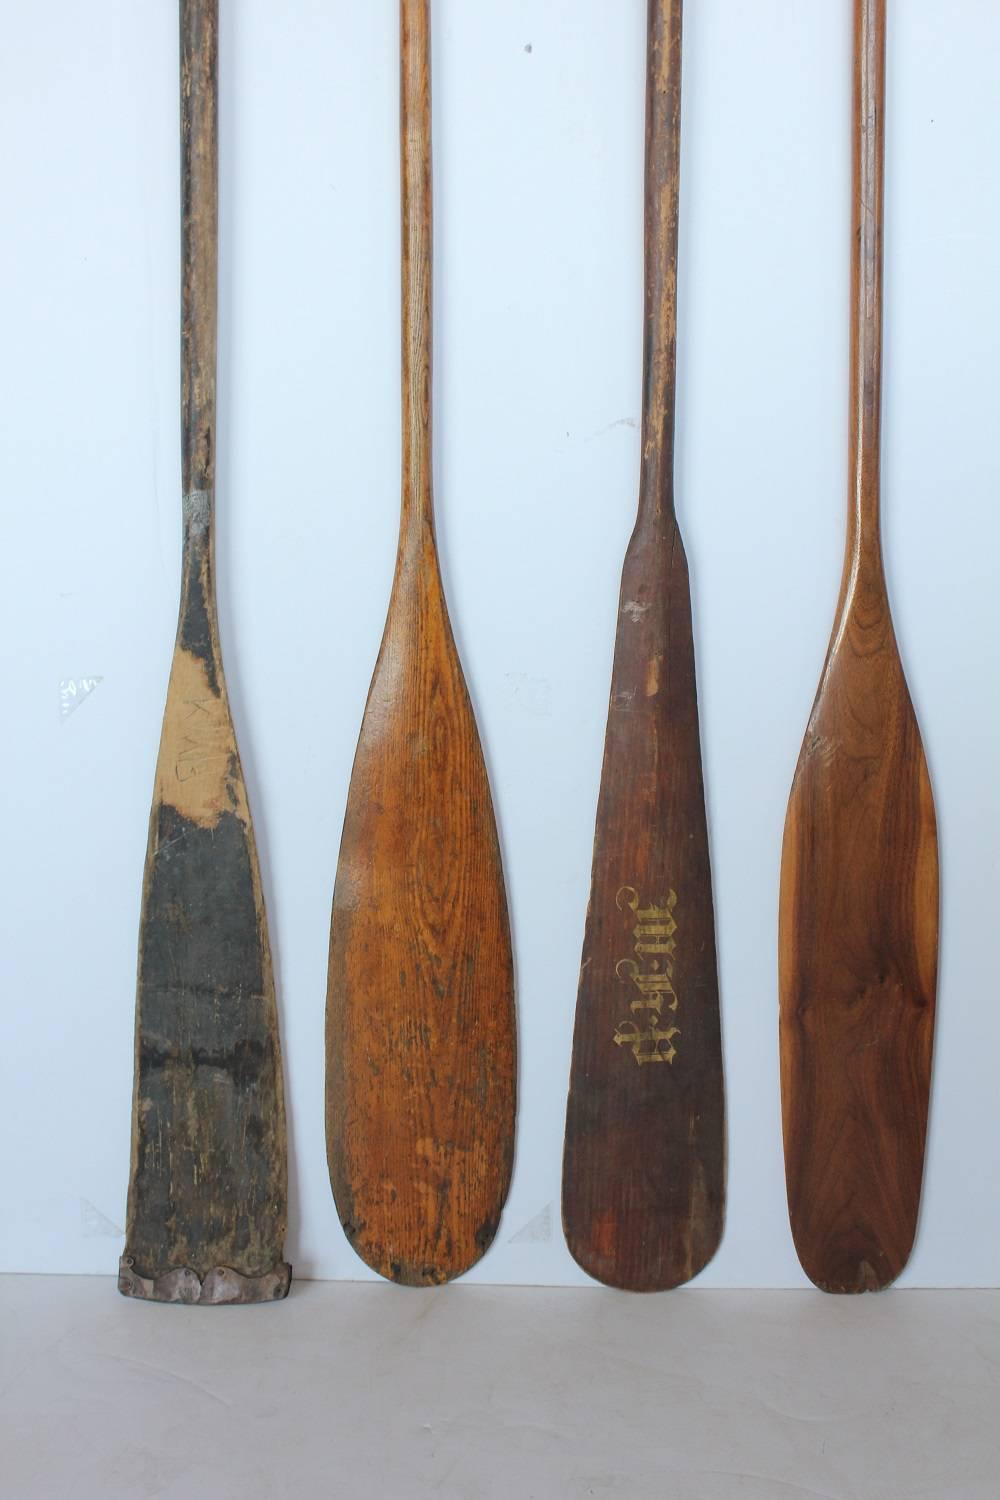 Antique Wooden Oars Collection. First on the right is copper tipped from 1884 with hand graved initial. Second on the right has hand painted initials. 